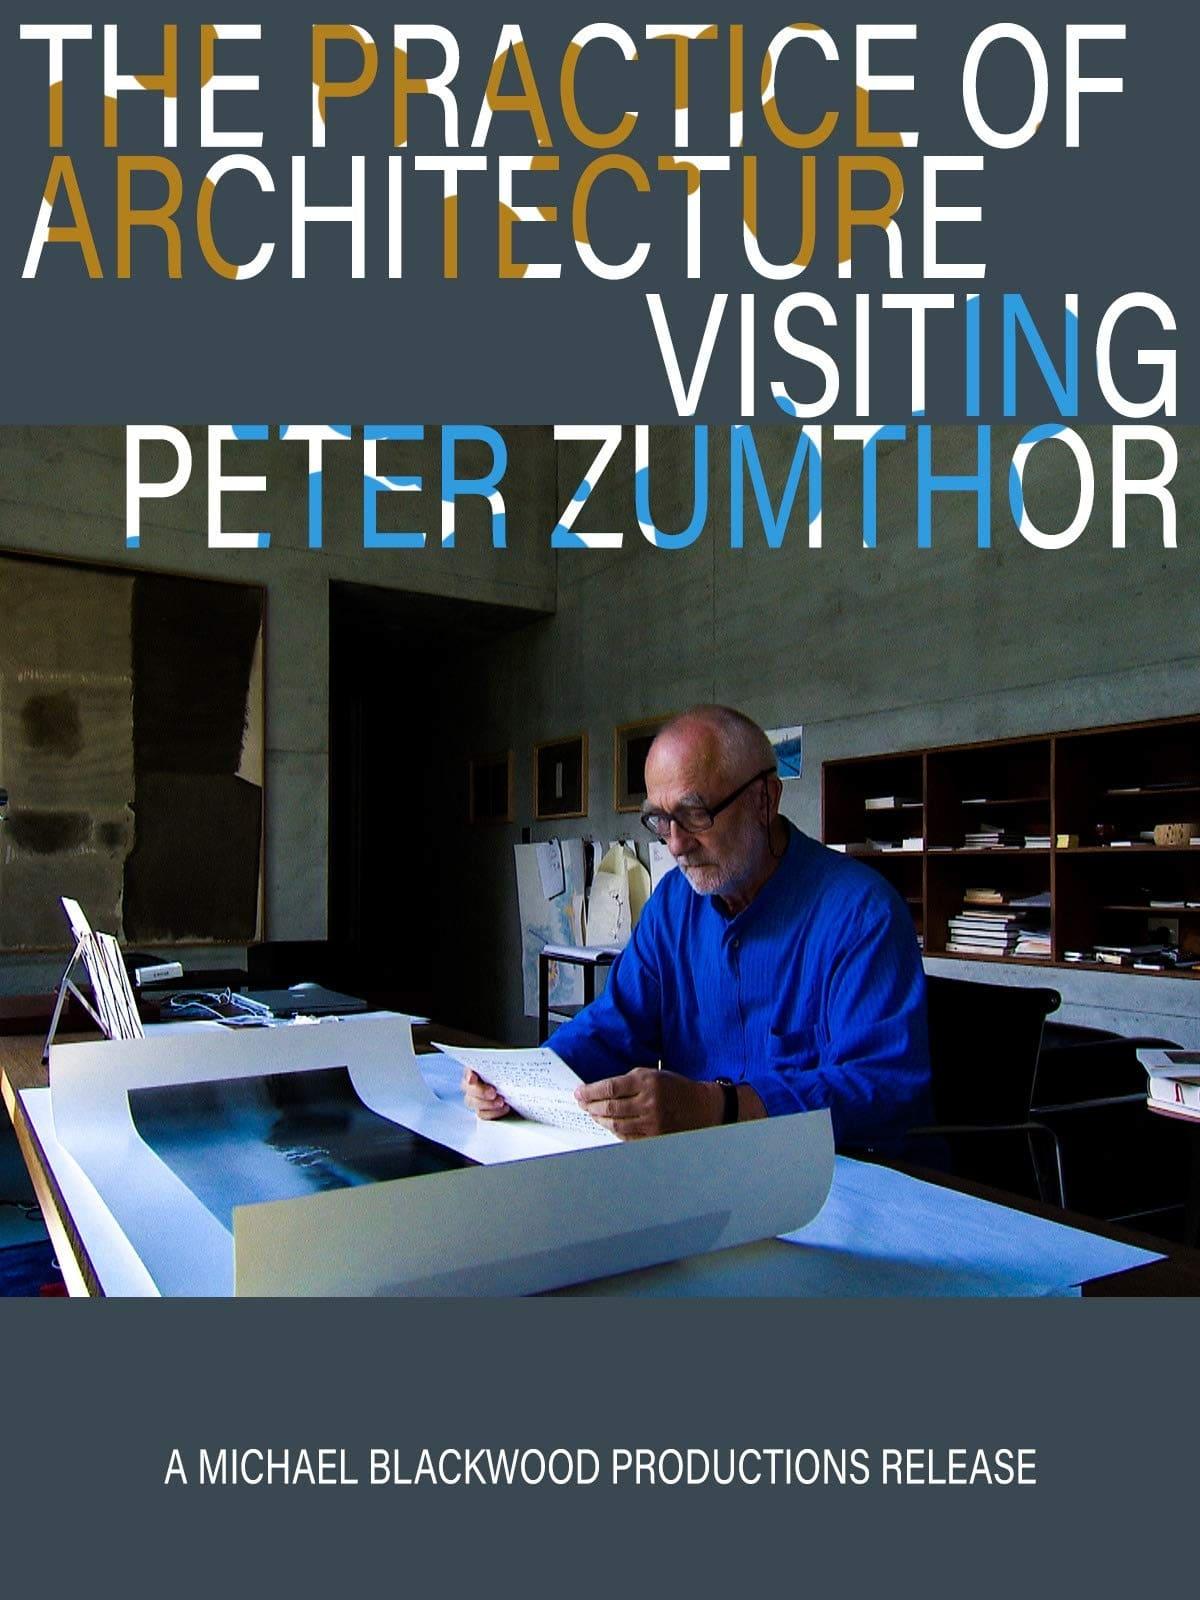 The Practice of Architecture: Visiting Peter Zumthor poster